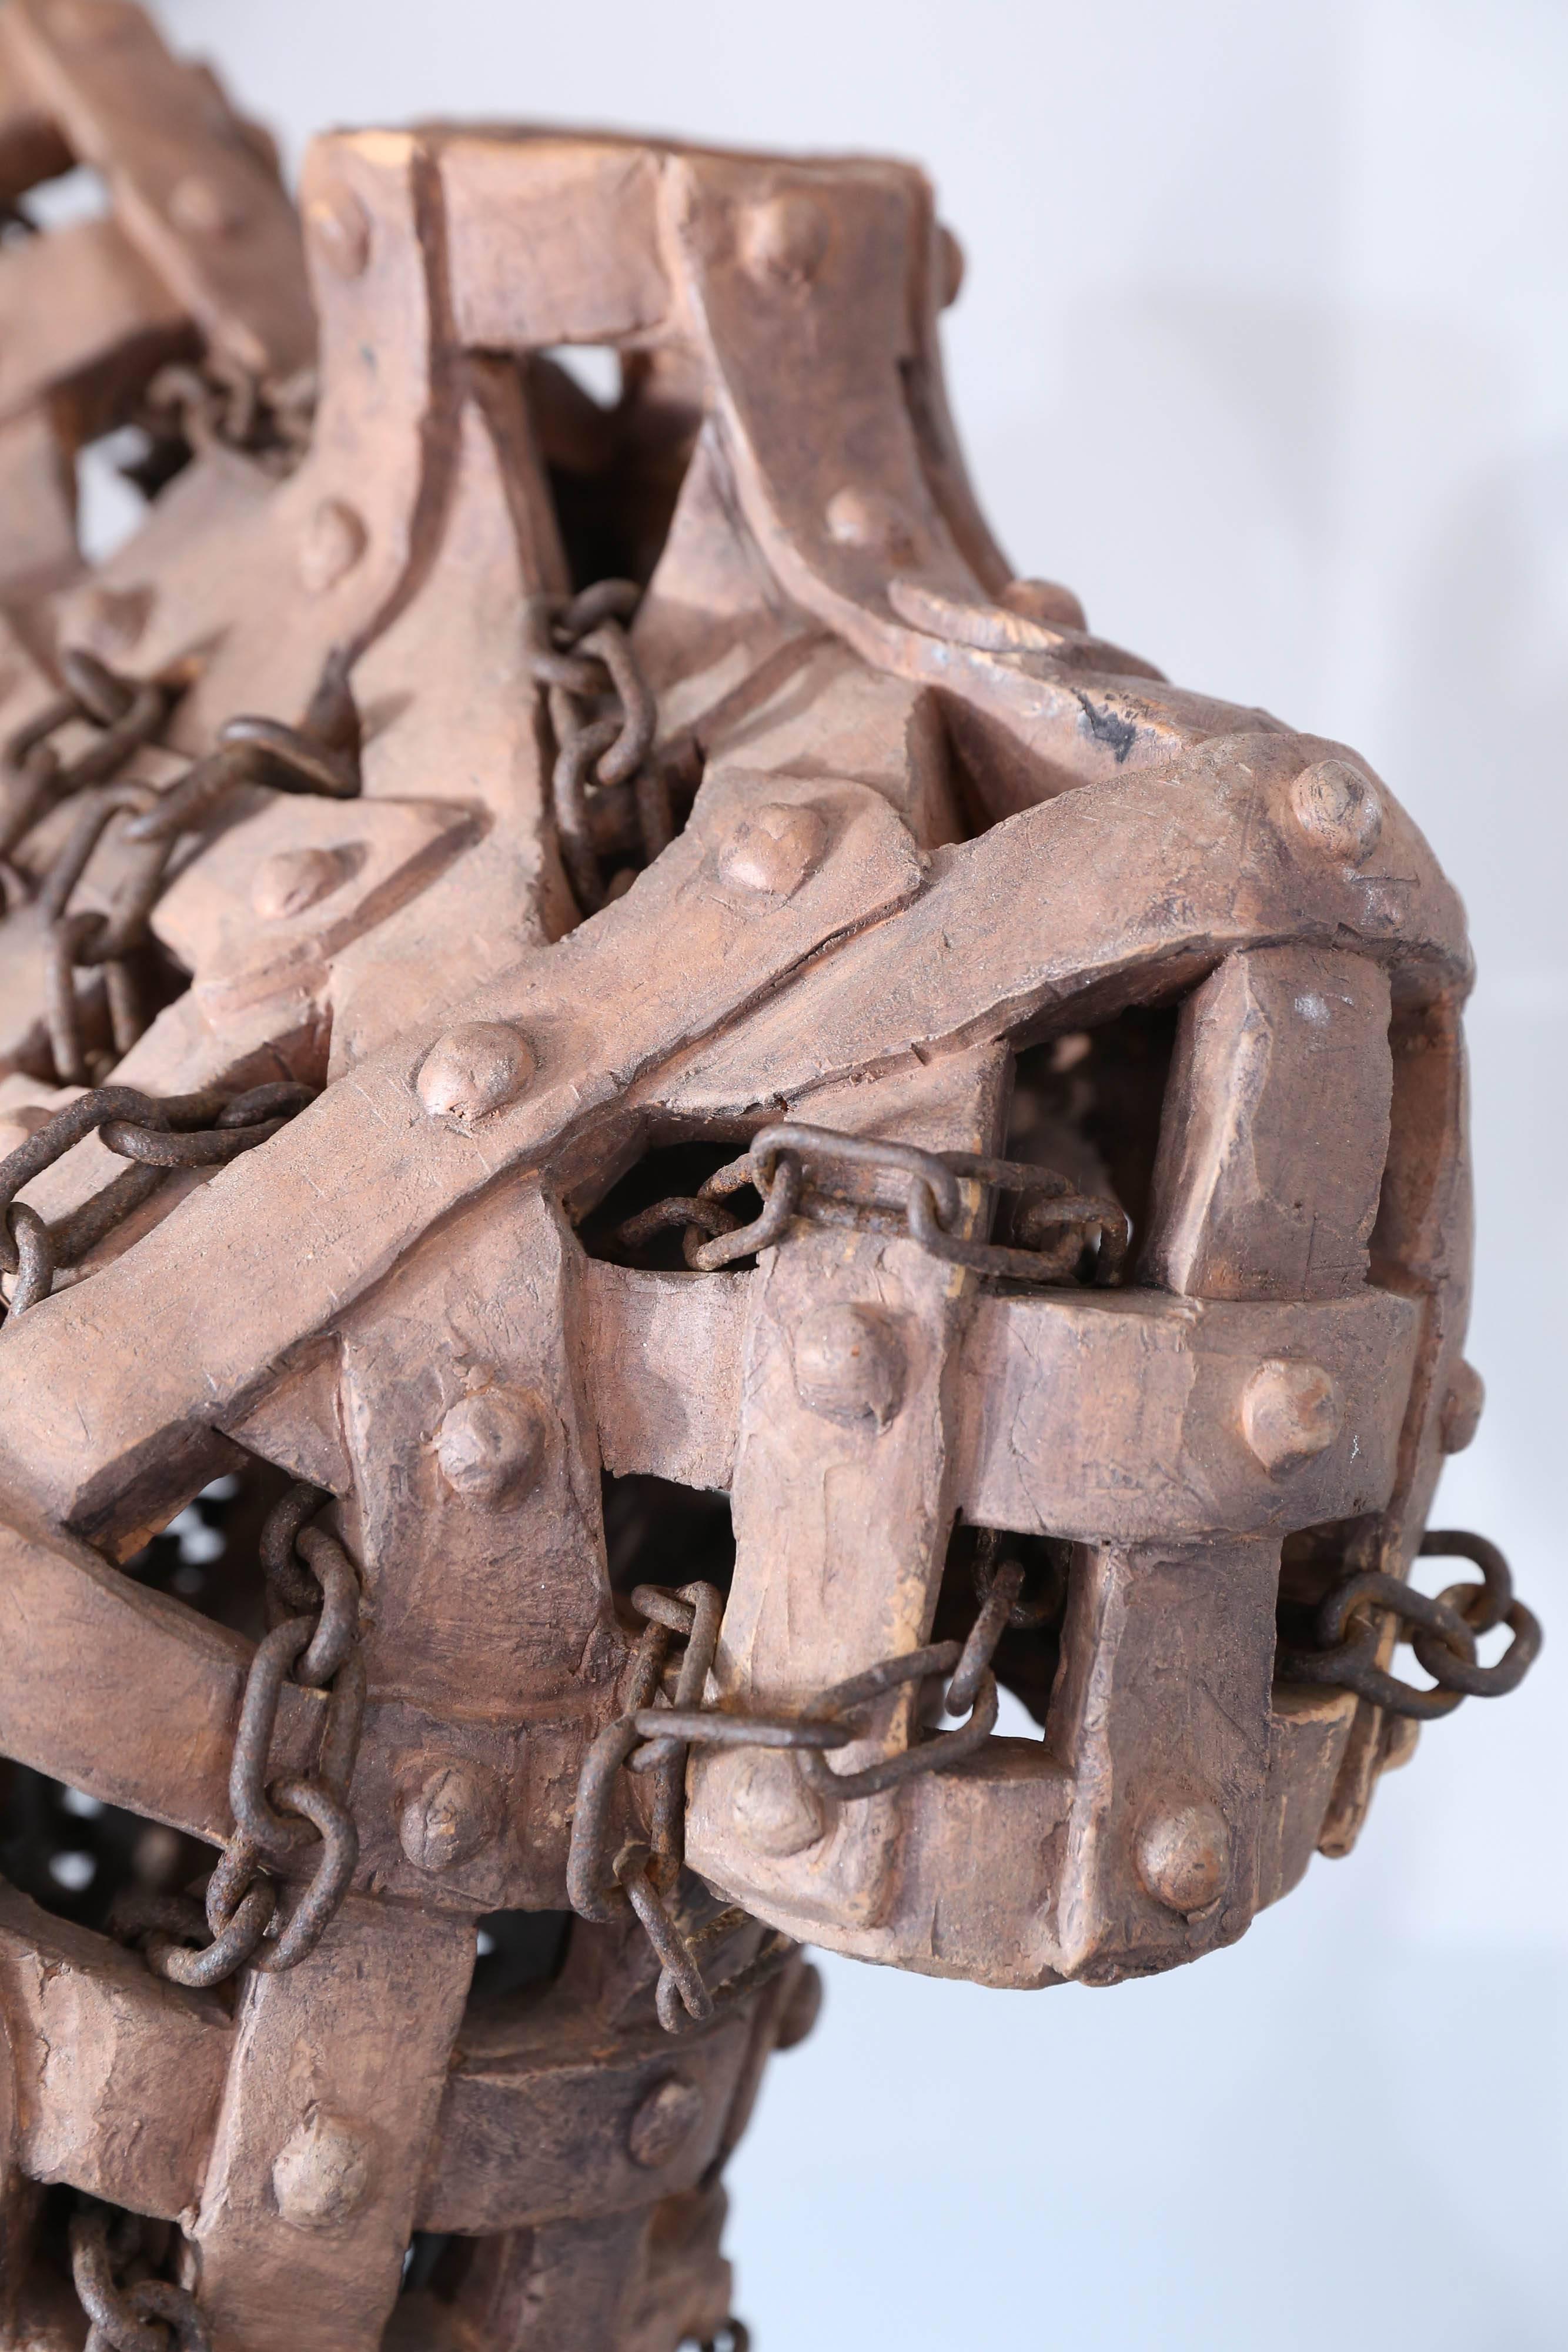 Tuscan Terracotta and Chain Female Sculpture by Italian Artist G. Ginestroni 1